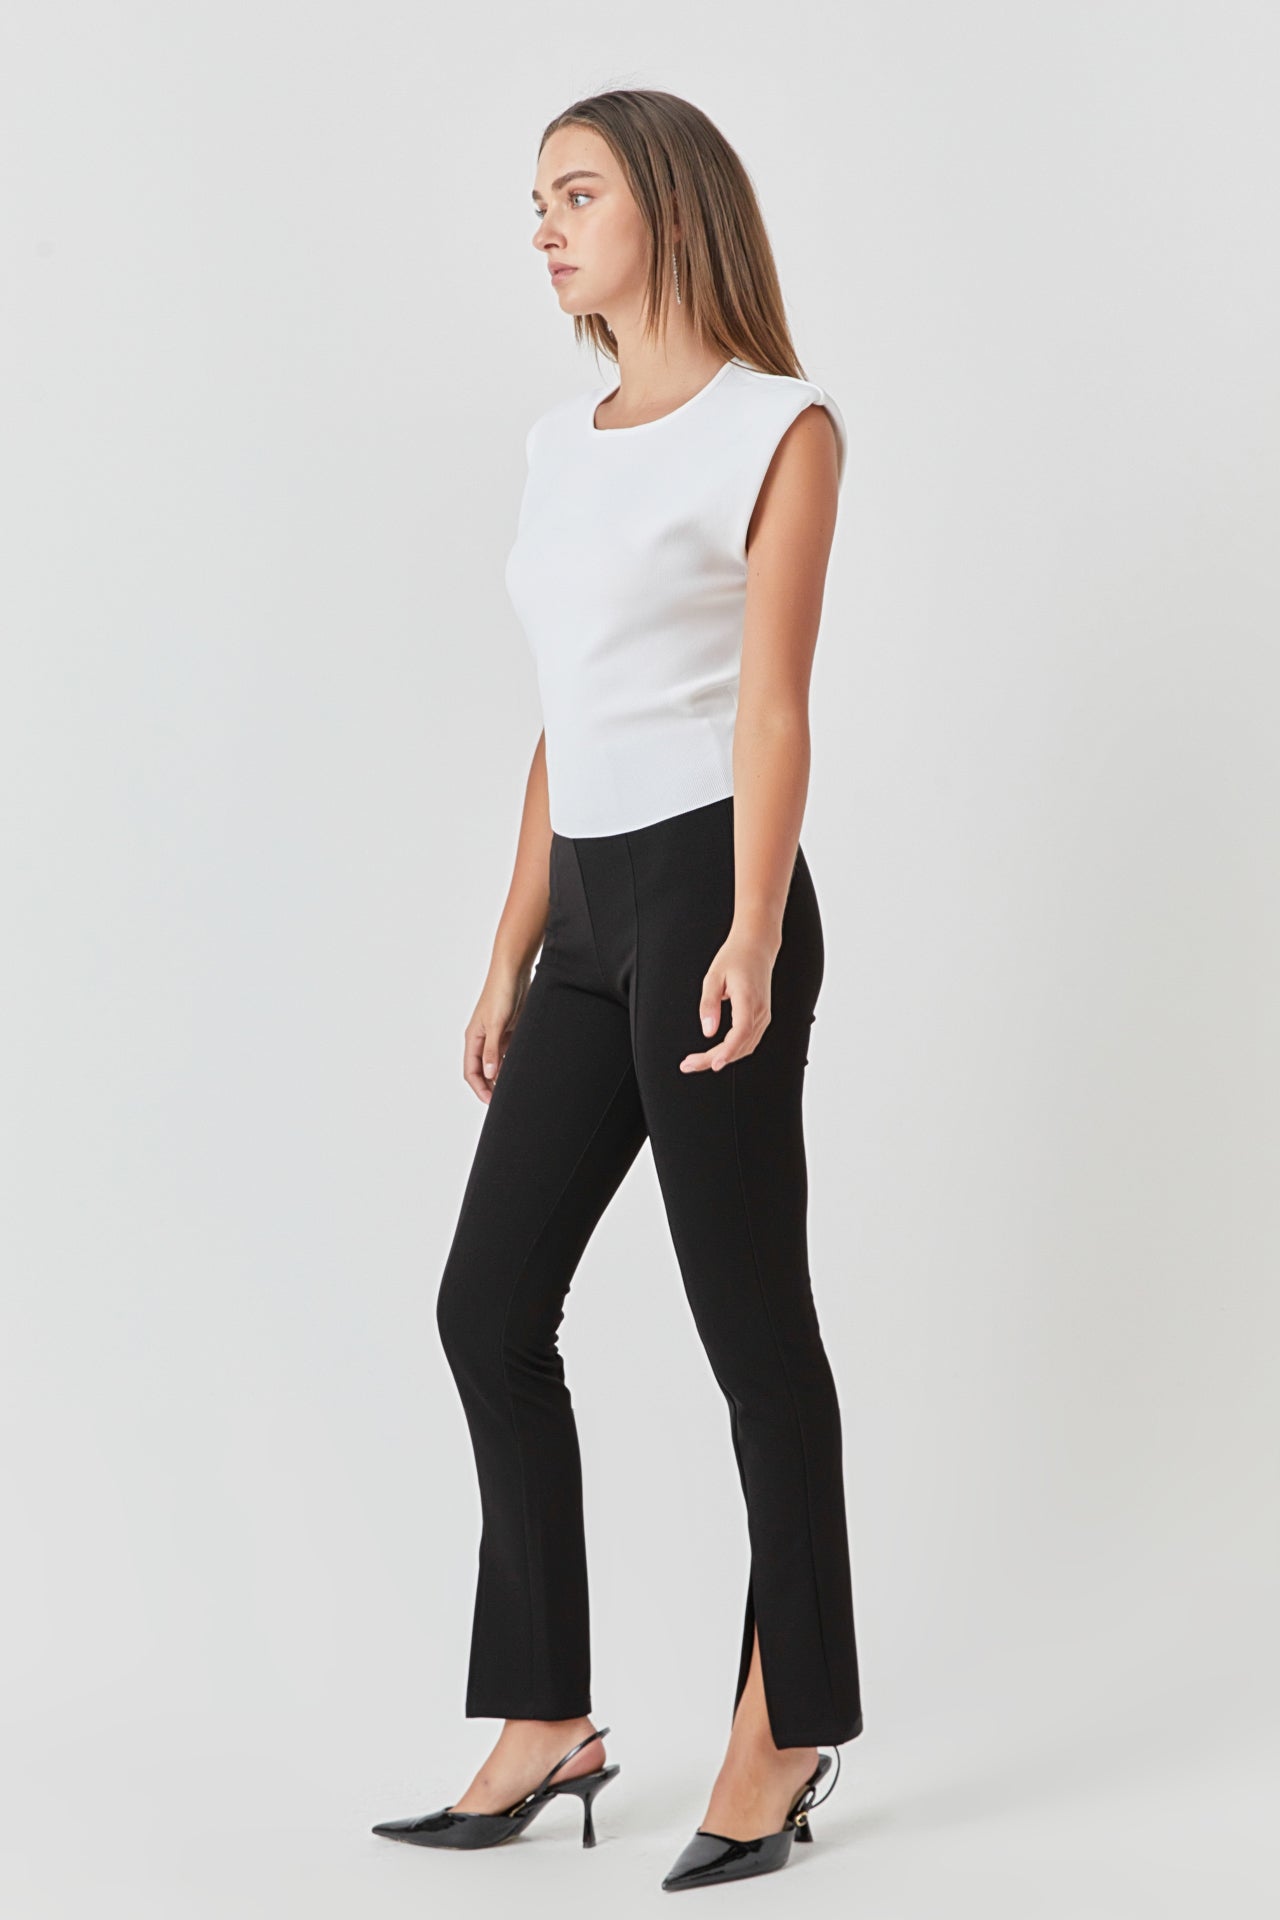 ENDLESS ROSE - Elevated Solid Knit Padded Top - TOPS available at Objectrare